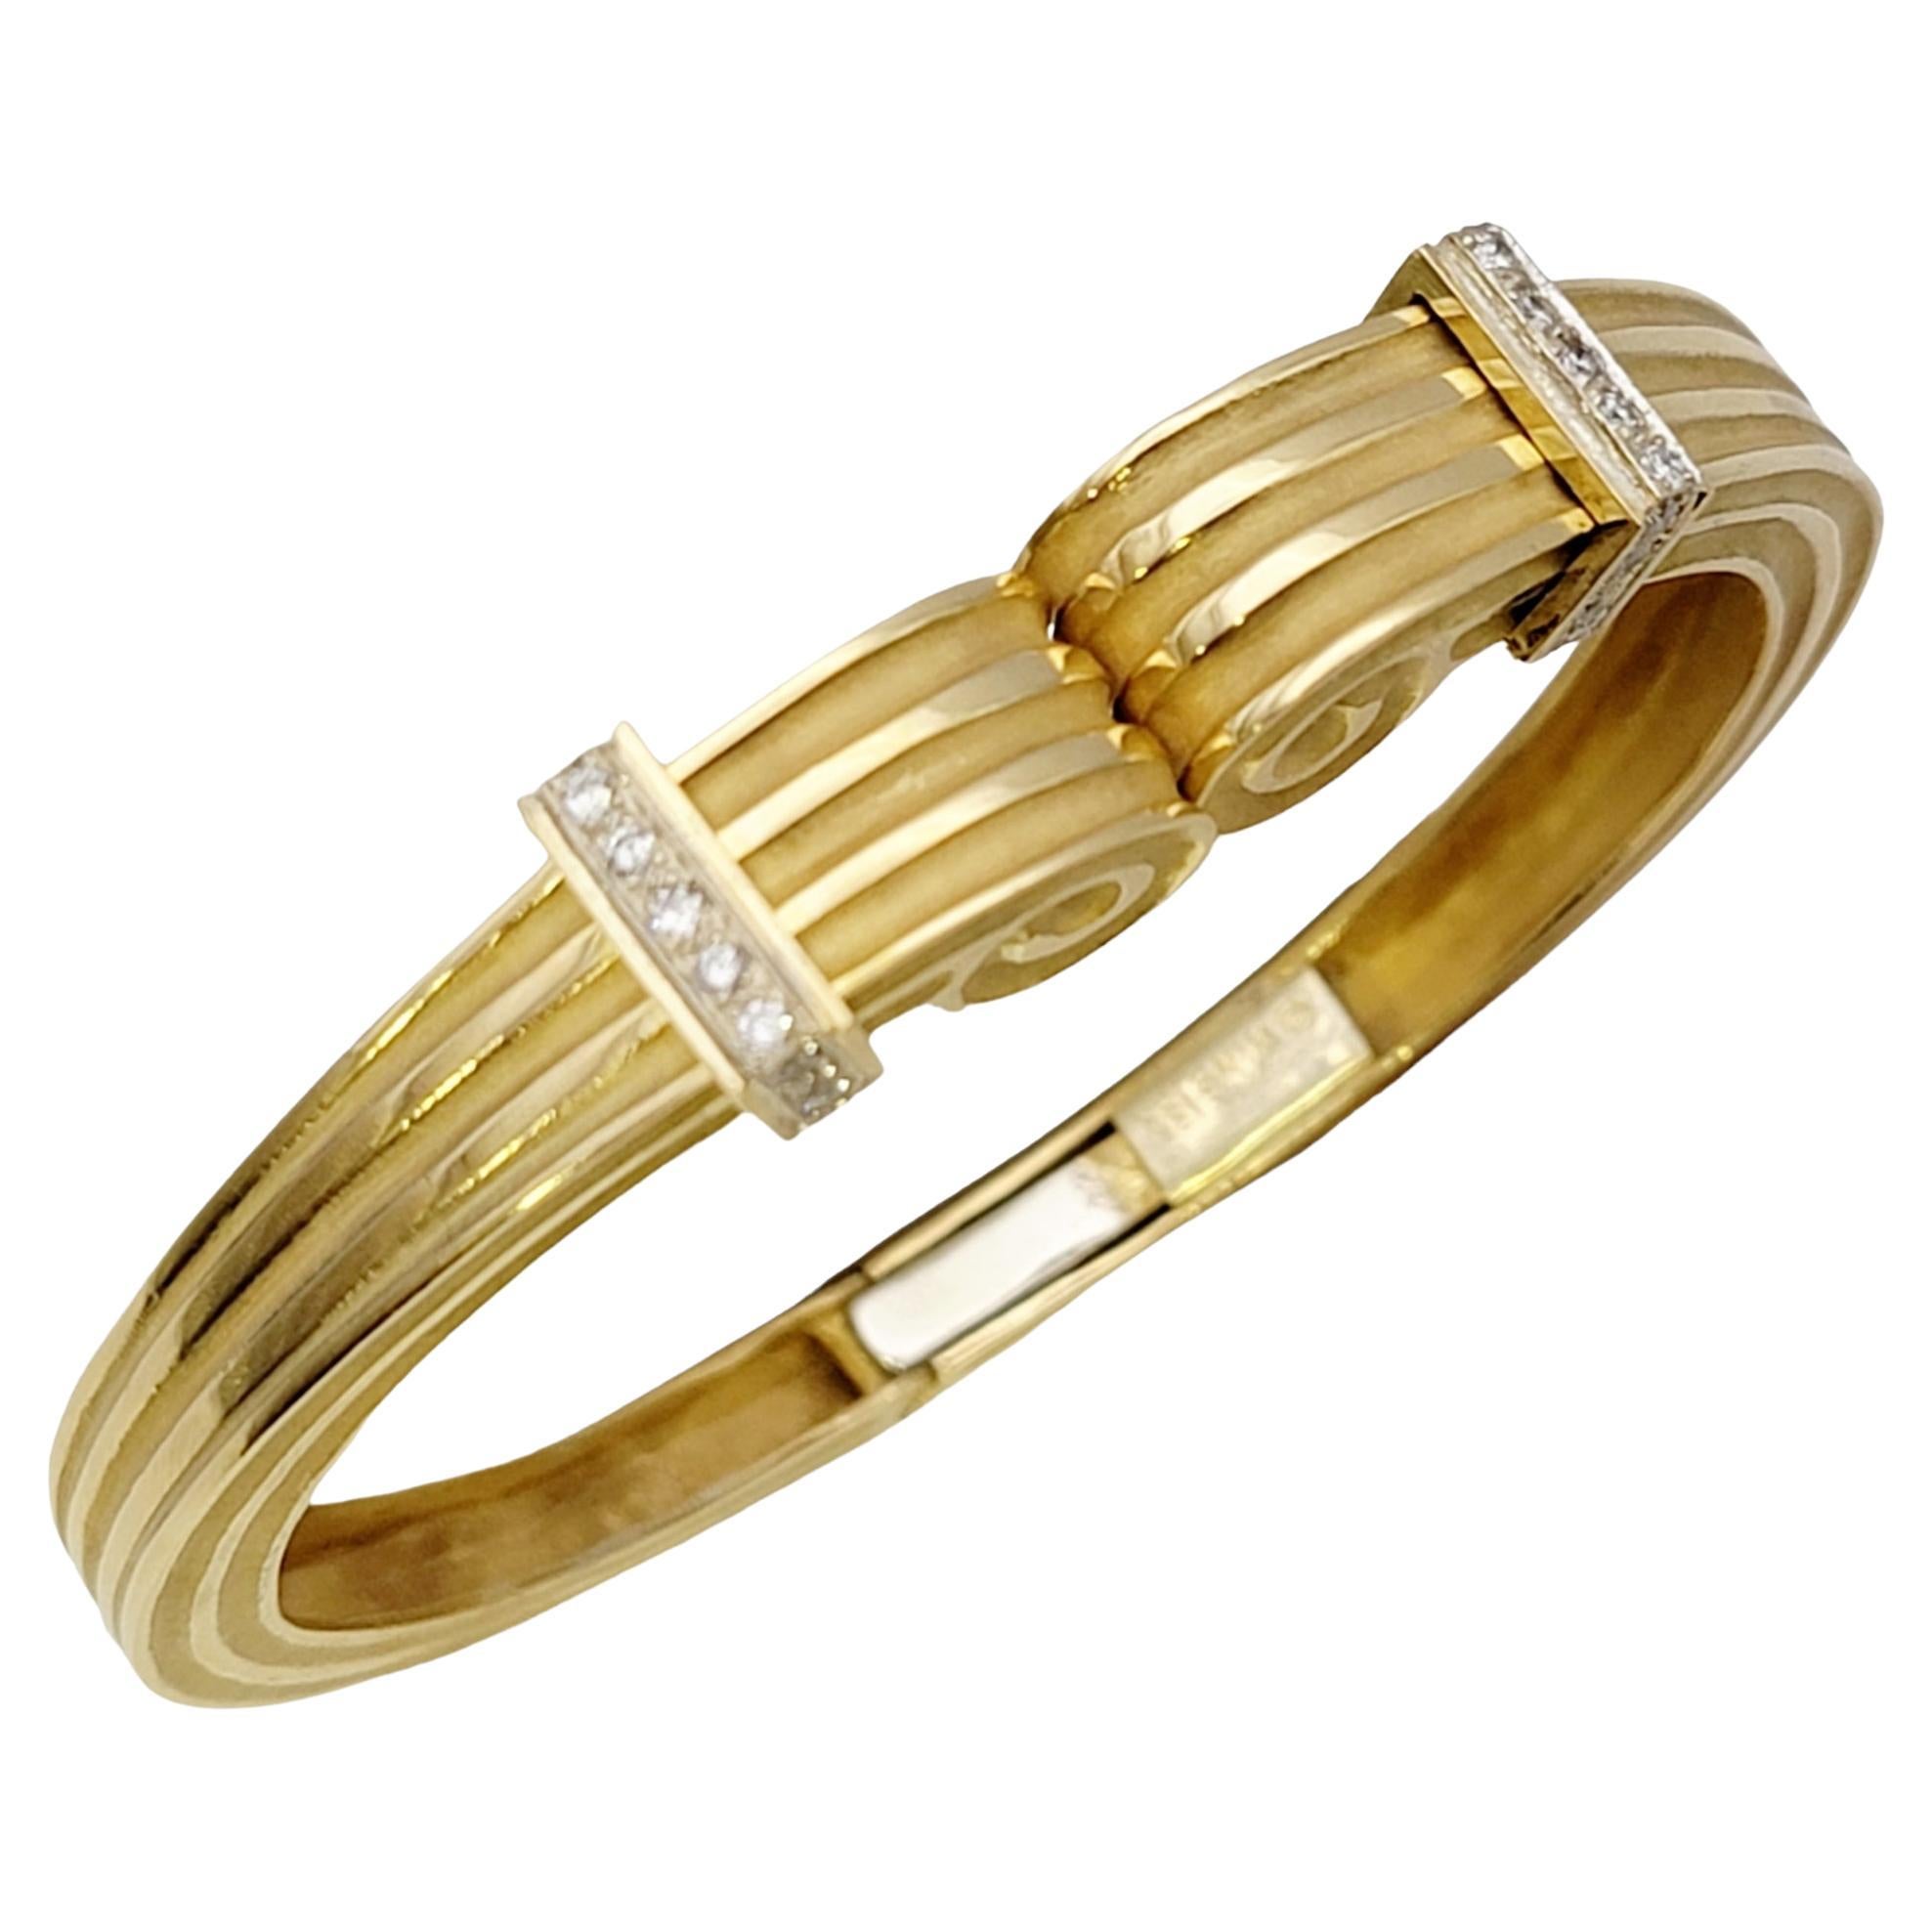 Gorgeous vintage cuff bracelet by designer, Robert Wander. This stunning piece is beautifully textured throughout, with a polished and brushed finish ridged design.  The ends of the bracelet are done in a scroll motif, accented by glittering natural